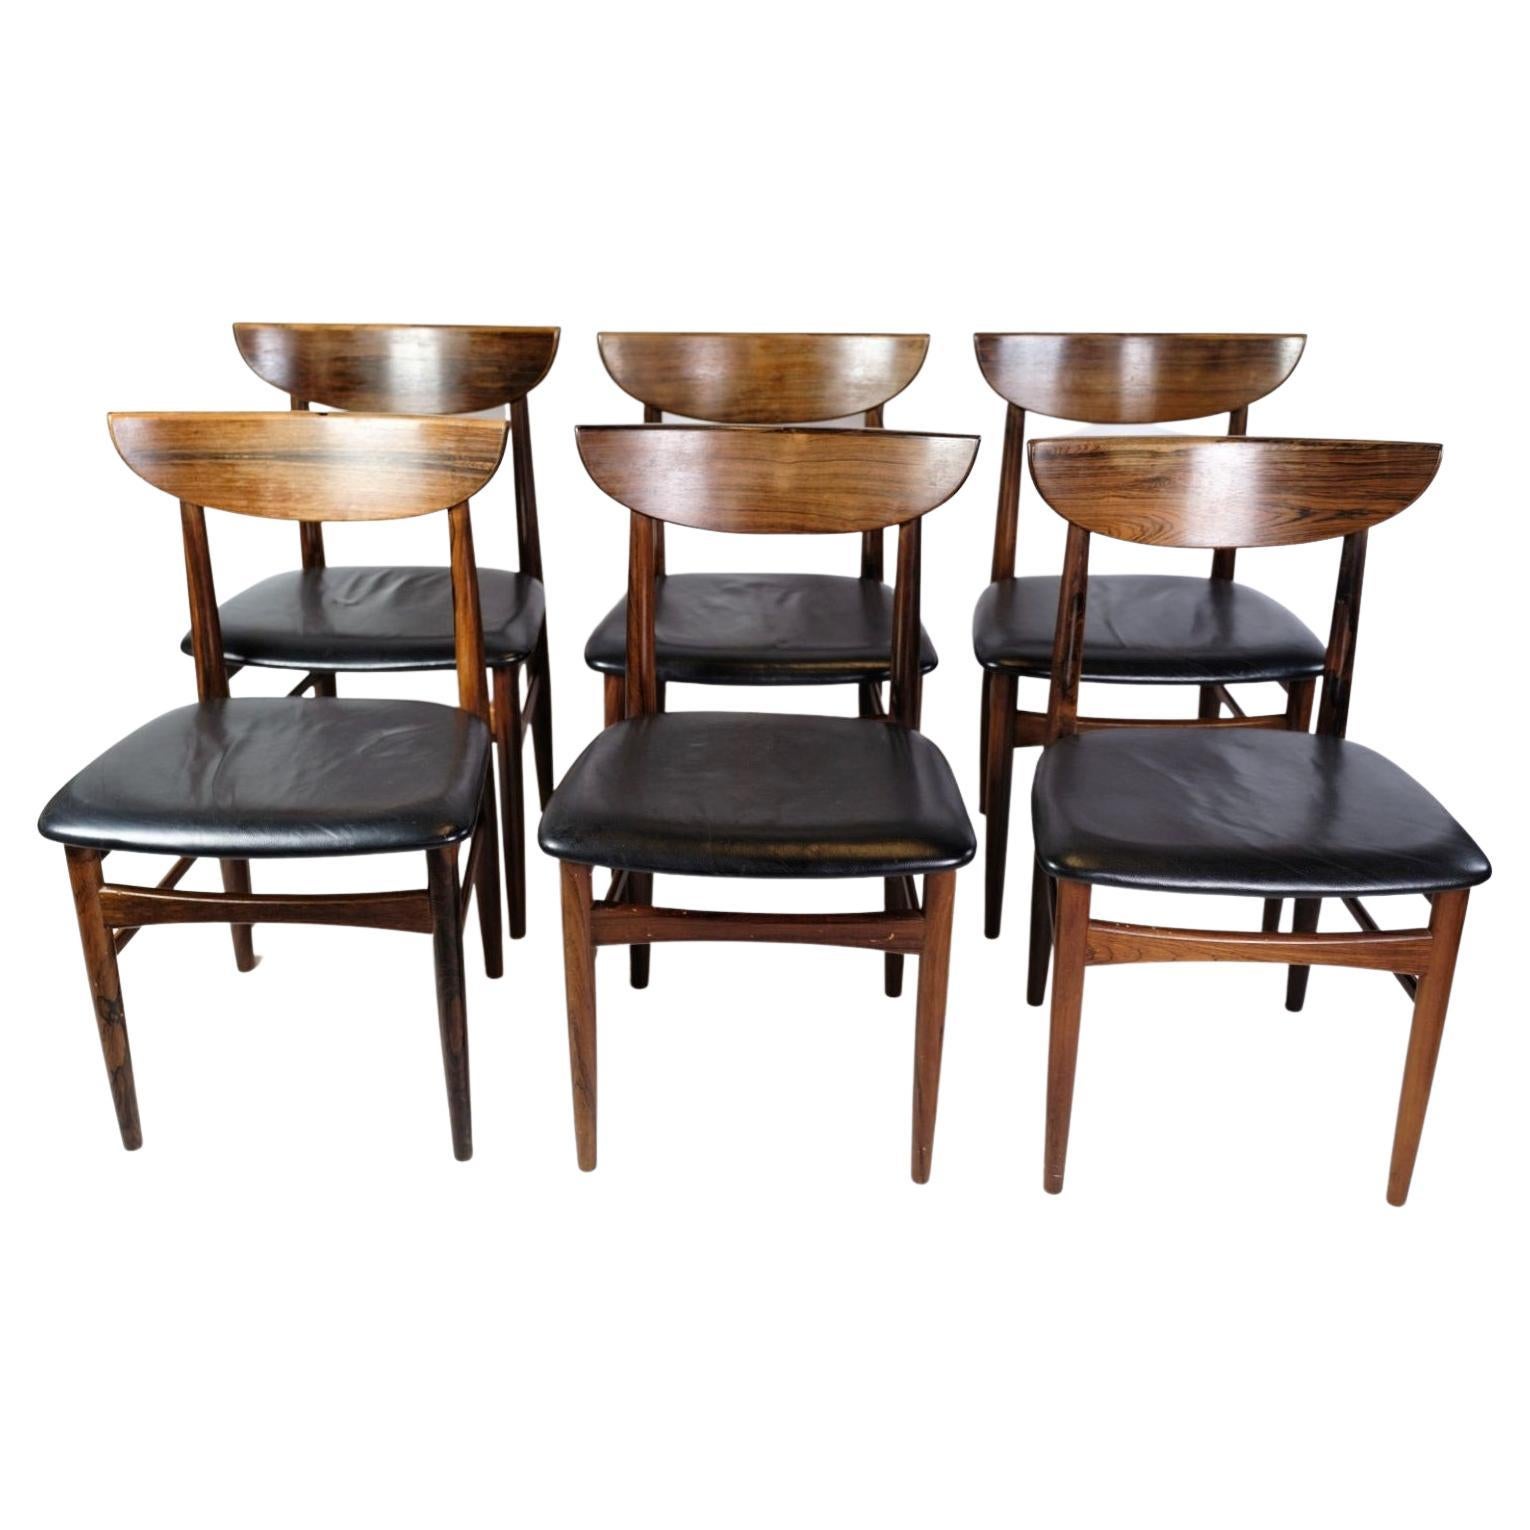 Set of Six Dining Table Chairs Made In Rosewood From 1960s